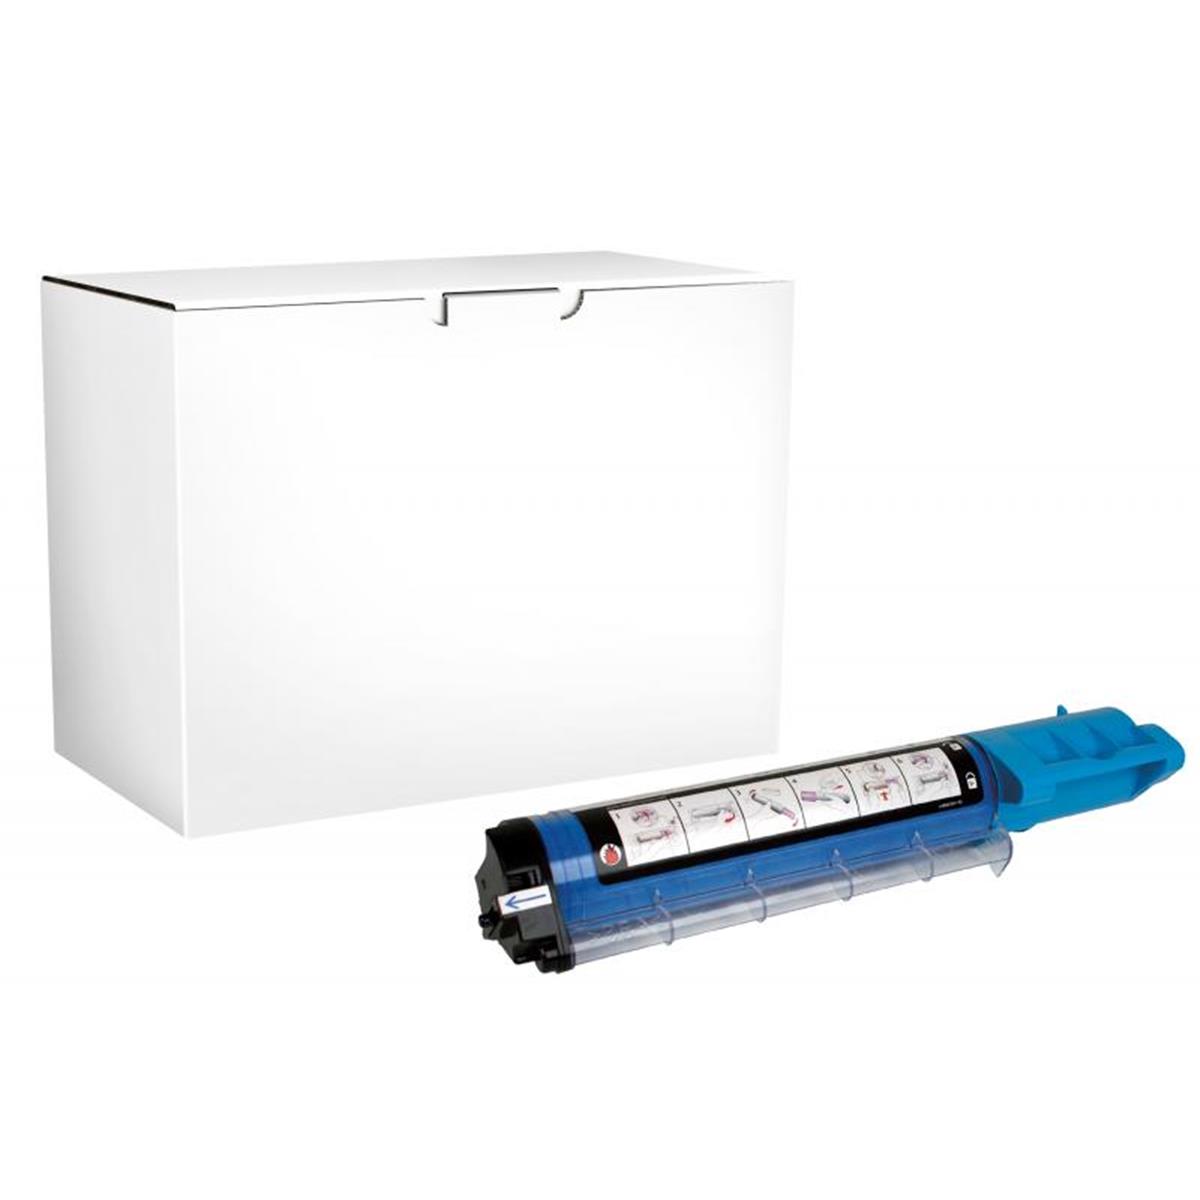 Picture of Dell 200110 High Yield Cyan Toner Cartridge for Dell 3000 & 3100